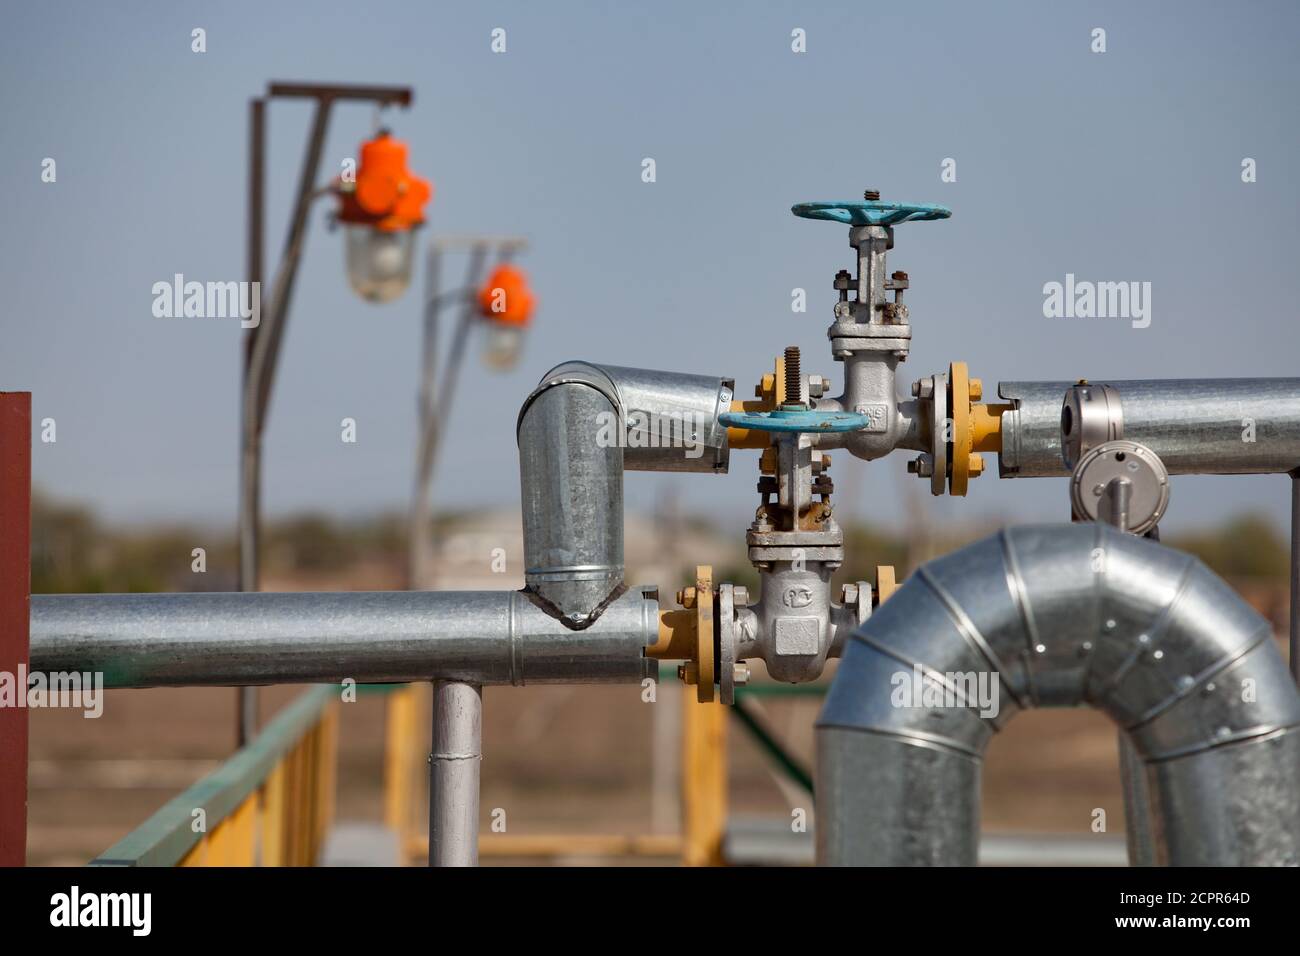 Oil refinery plant in desert. Valve armature and pipes on grey sky background. Focus on foreground. Stock Photo